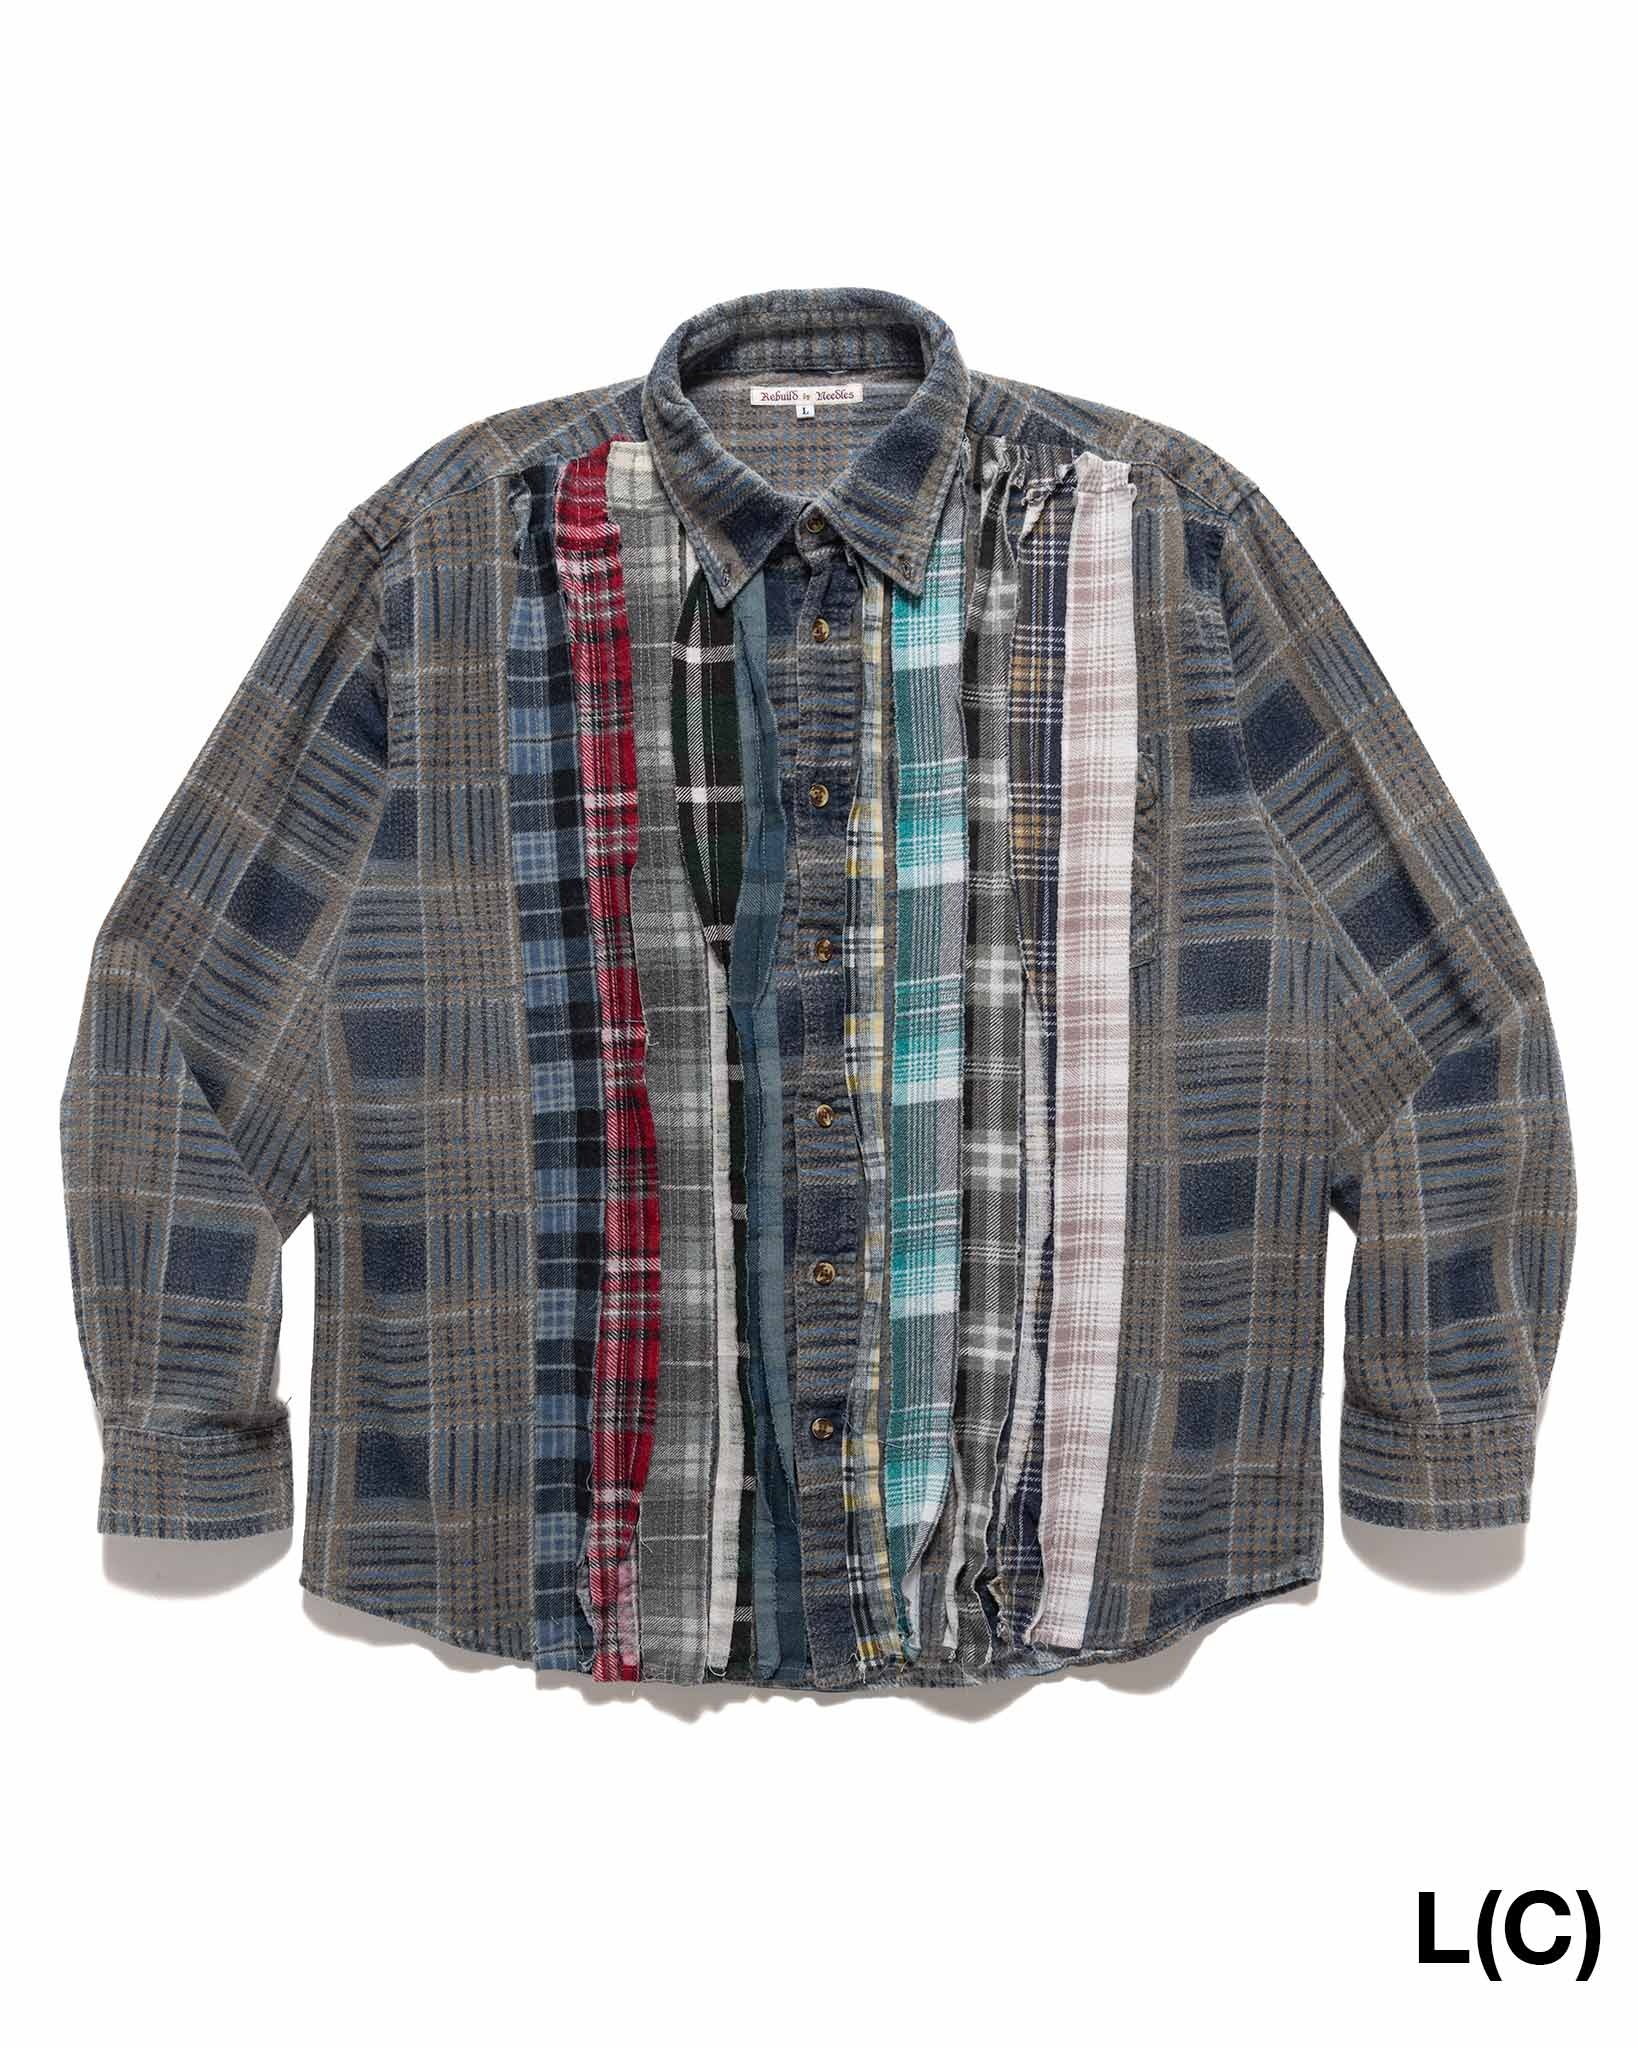 Rebuild by Needles Flannel Shirt -> Ribbon Shirt Assorted - 15